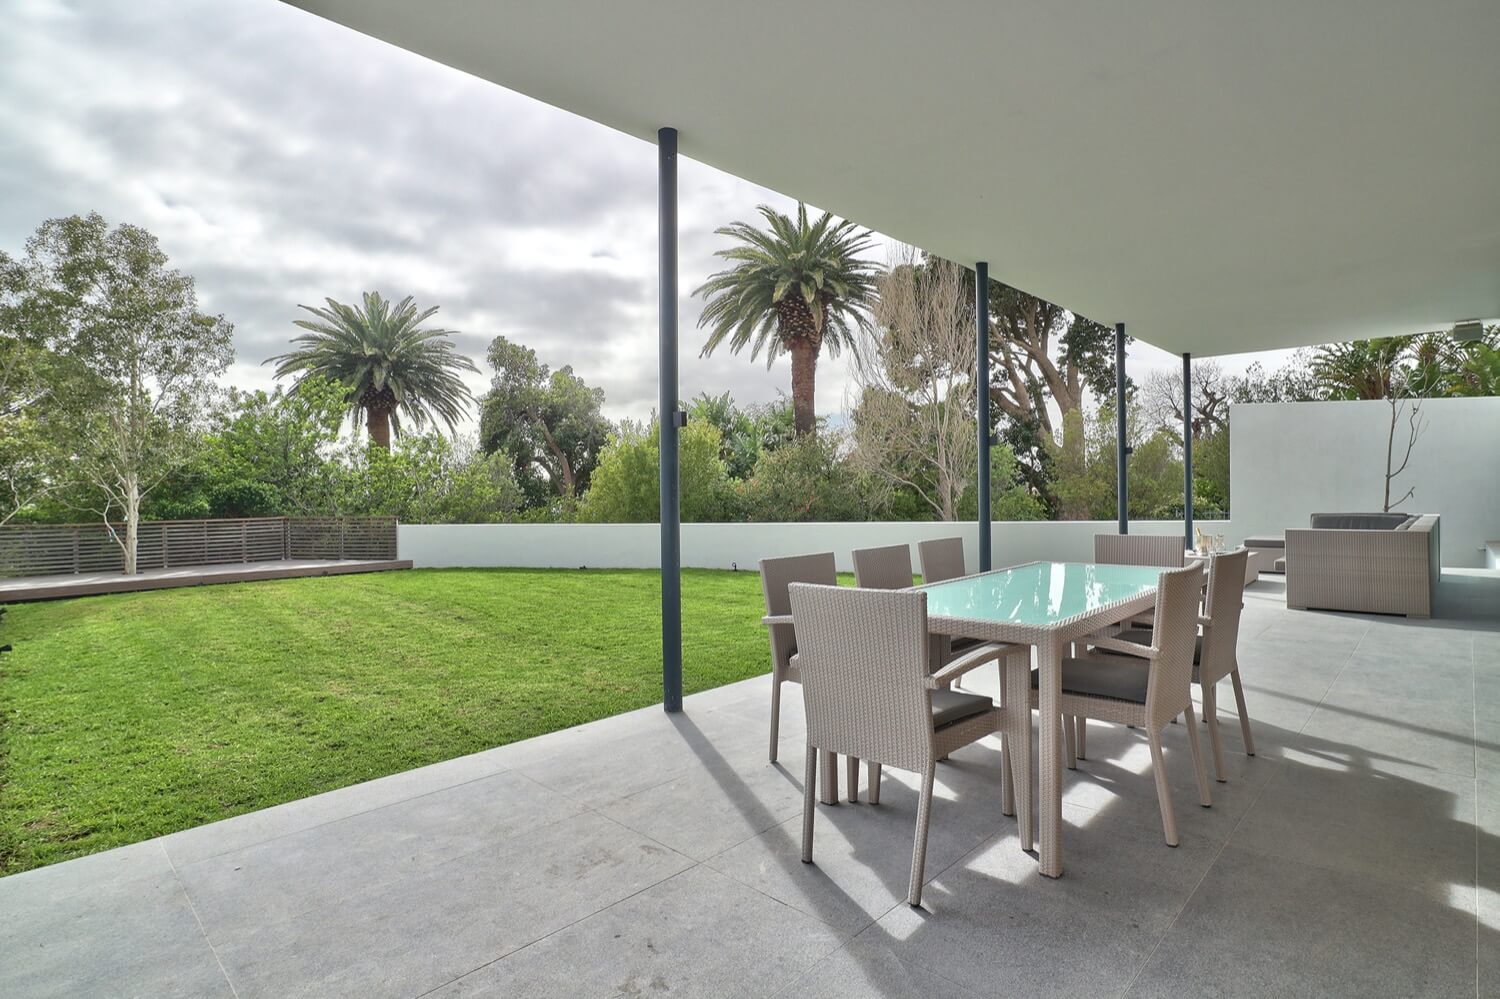 Photo 22 of Villa Glen accommodation in Higgovale, Cape Town with 5 bedrooms and 5 bathrooms